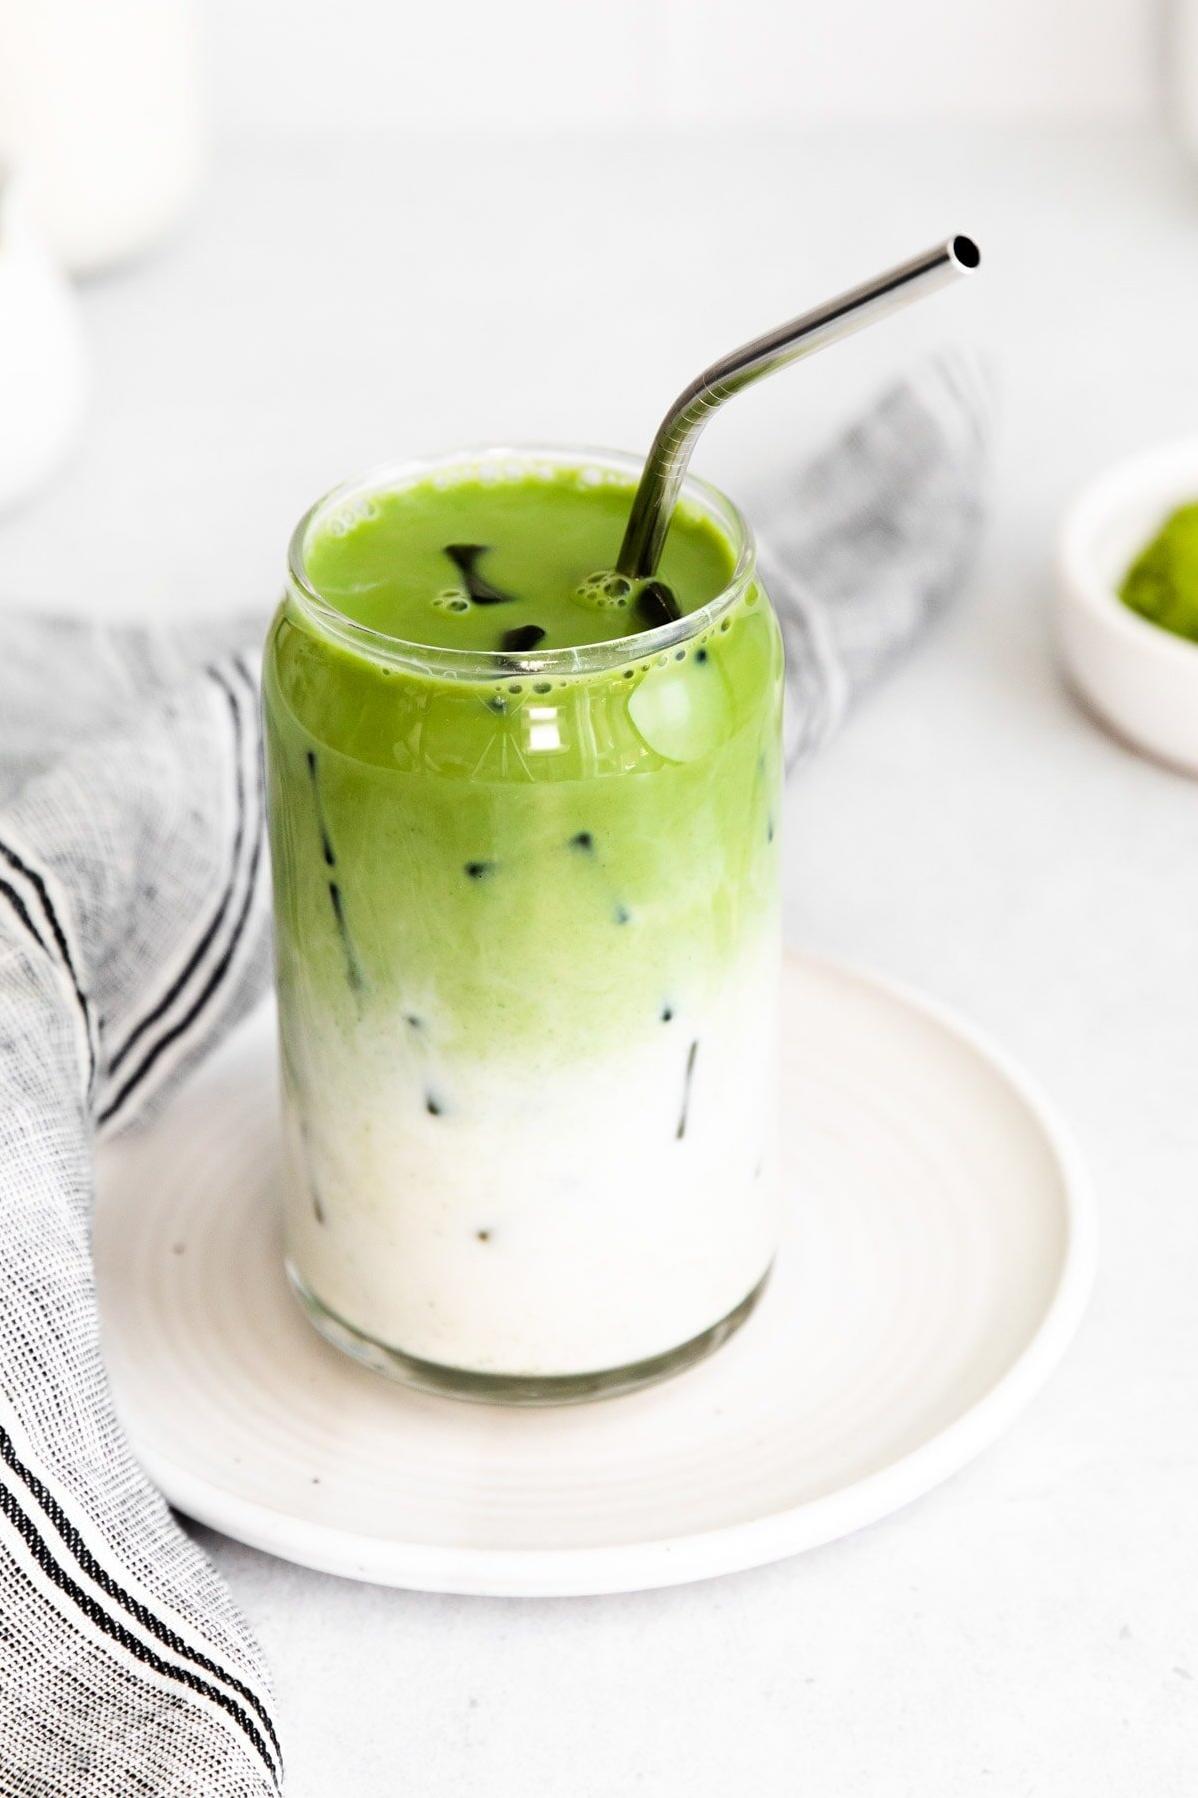  Satisfy your cravings in a healthy way with our matcha green tea latte.